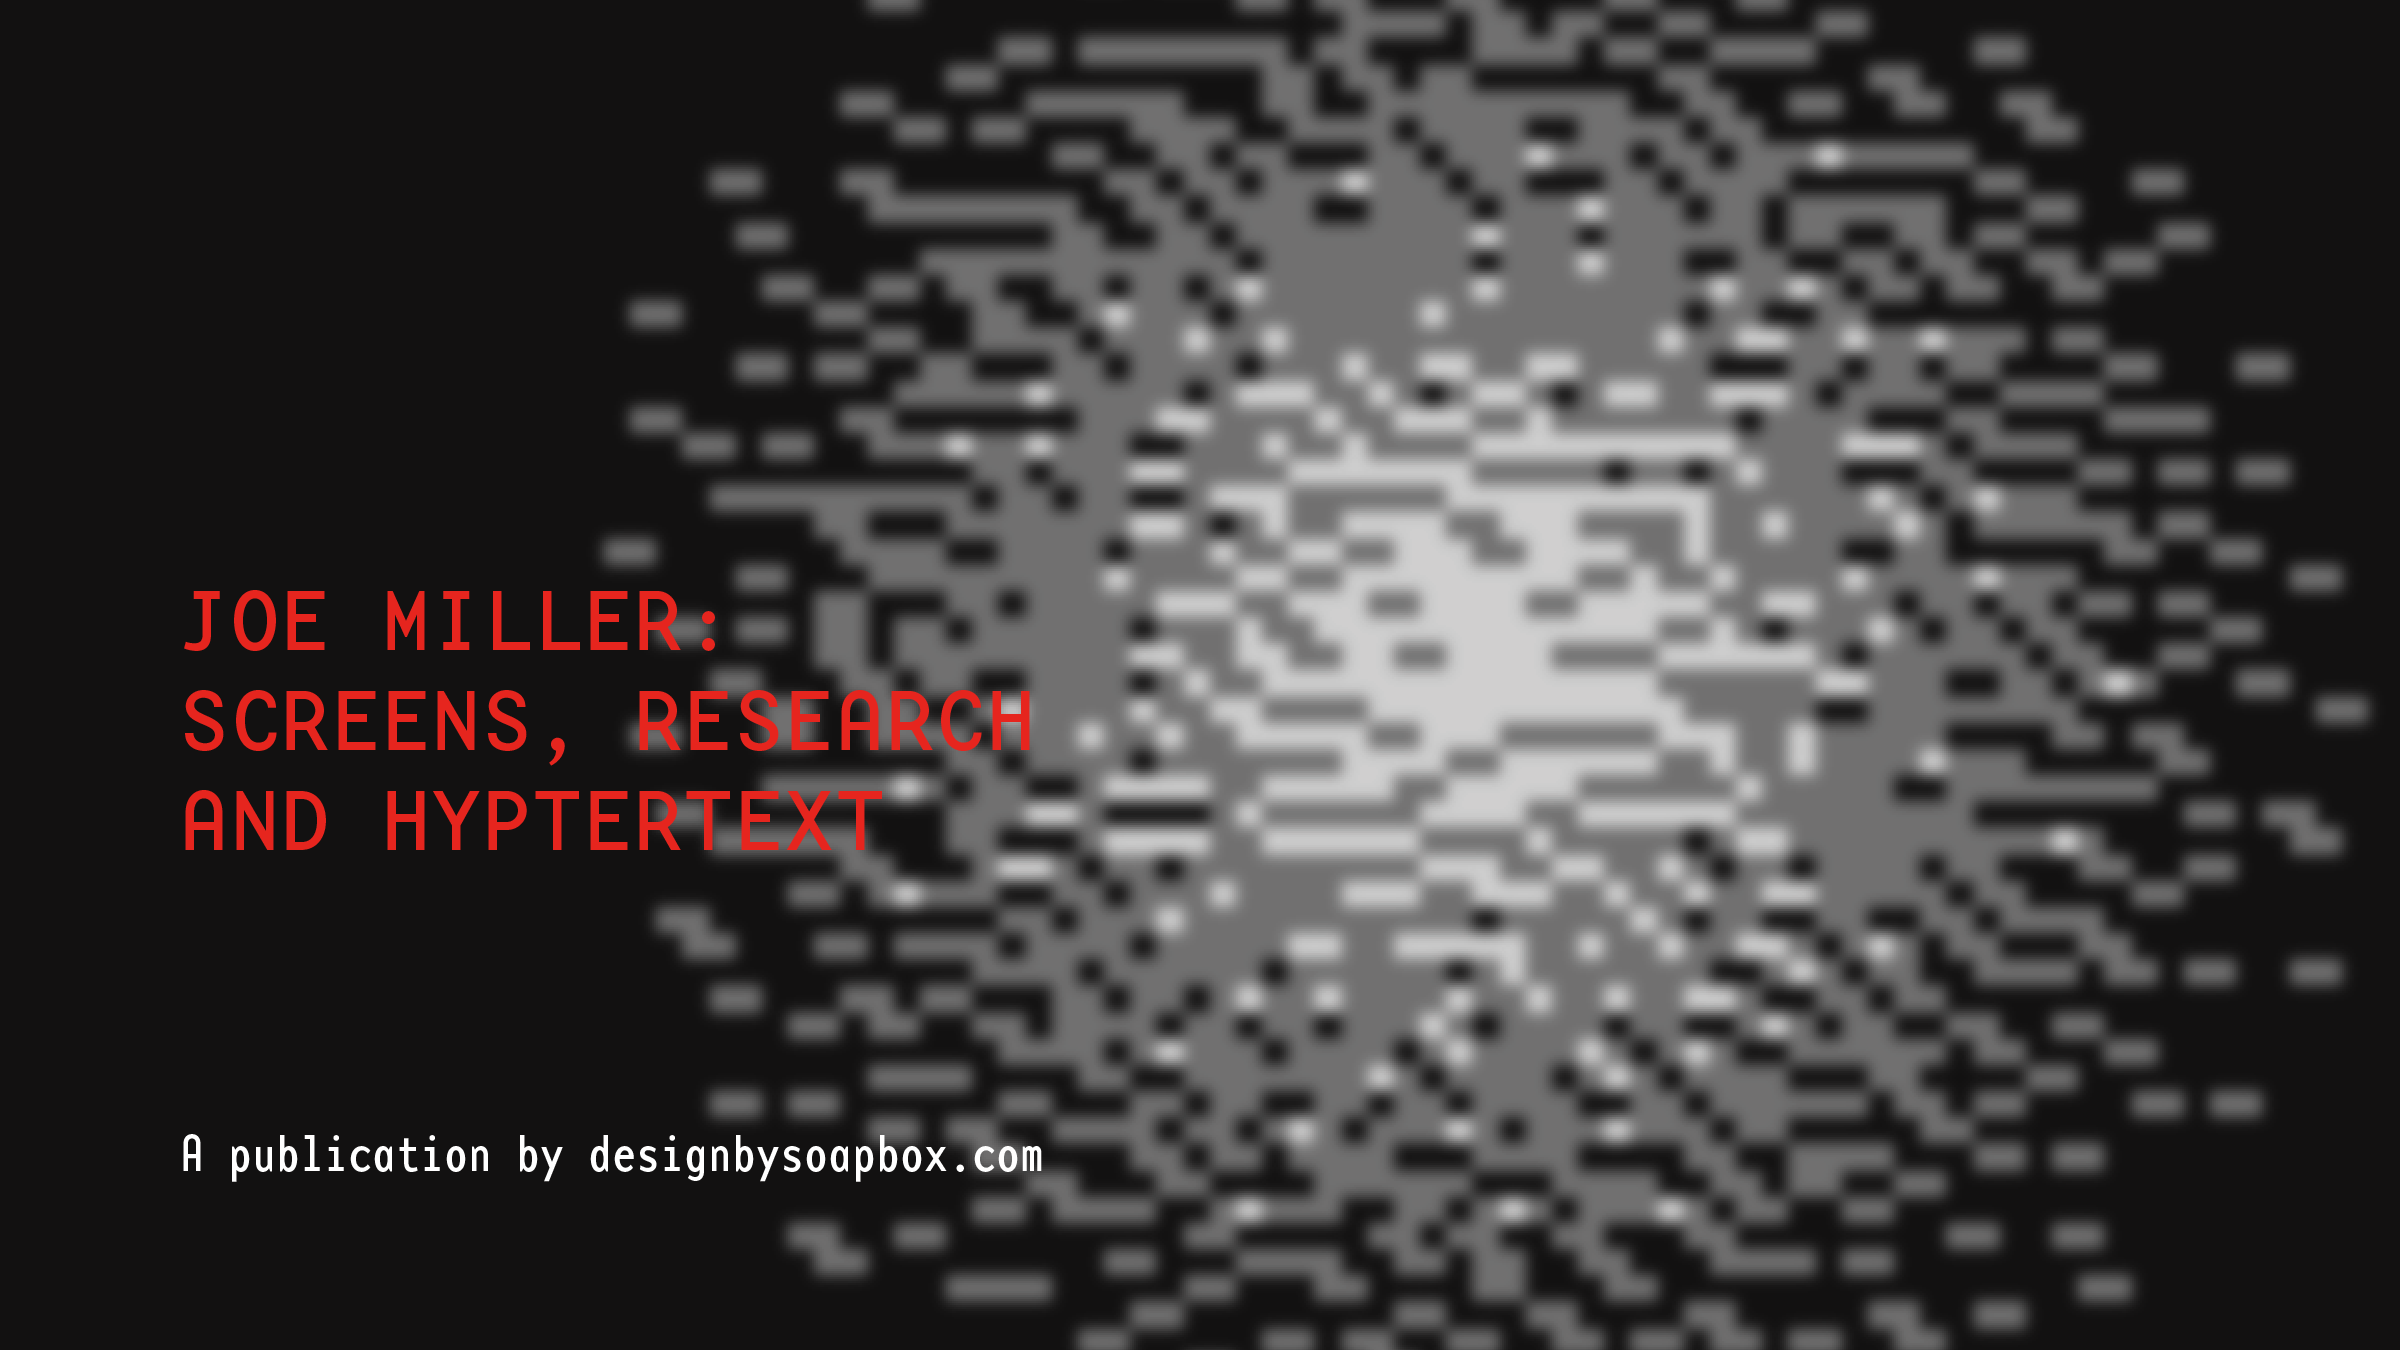 Project title: Screens, Research and Hypertext. Author: Joe Miller. Design credit: designbysoapbox.com. Cover image: Abstract, pixelated explosion of white and gray cubes and rectangles.